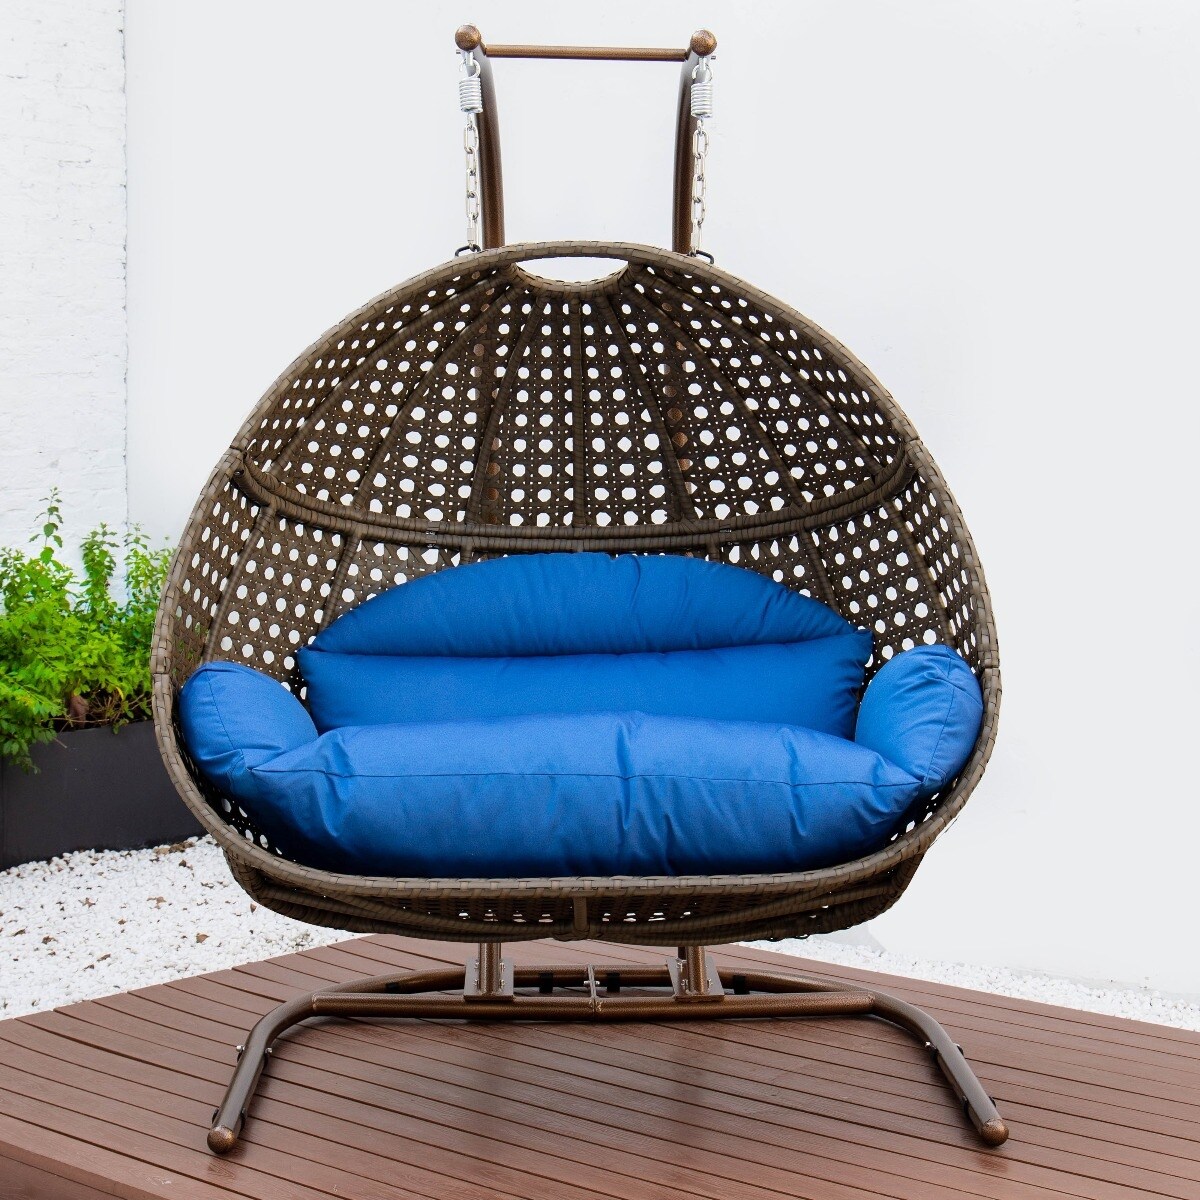 https://ak1.ostkcdn.com/images/products/is/images/direct/81112c10e5028d26190c688fd969e21073d169c9/All-Weather-Wicker-Egg-Shaped-2-person-Porch-Swing-with-Cushion.jpg